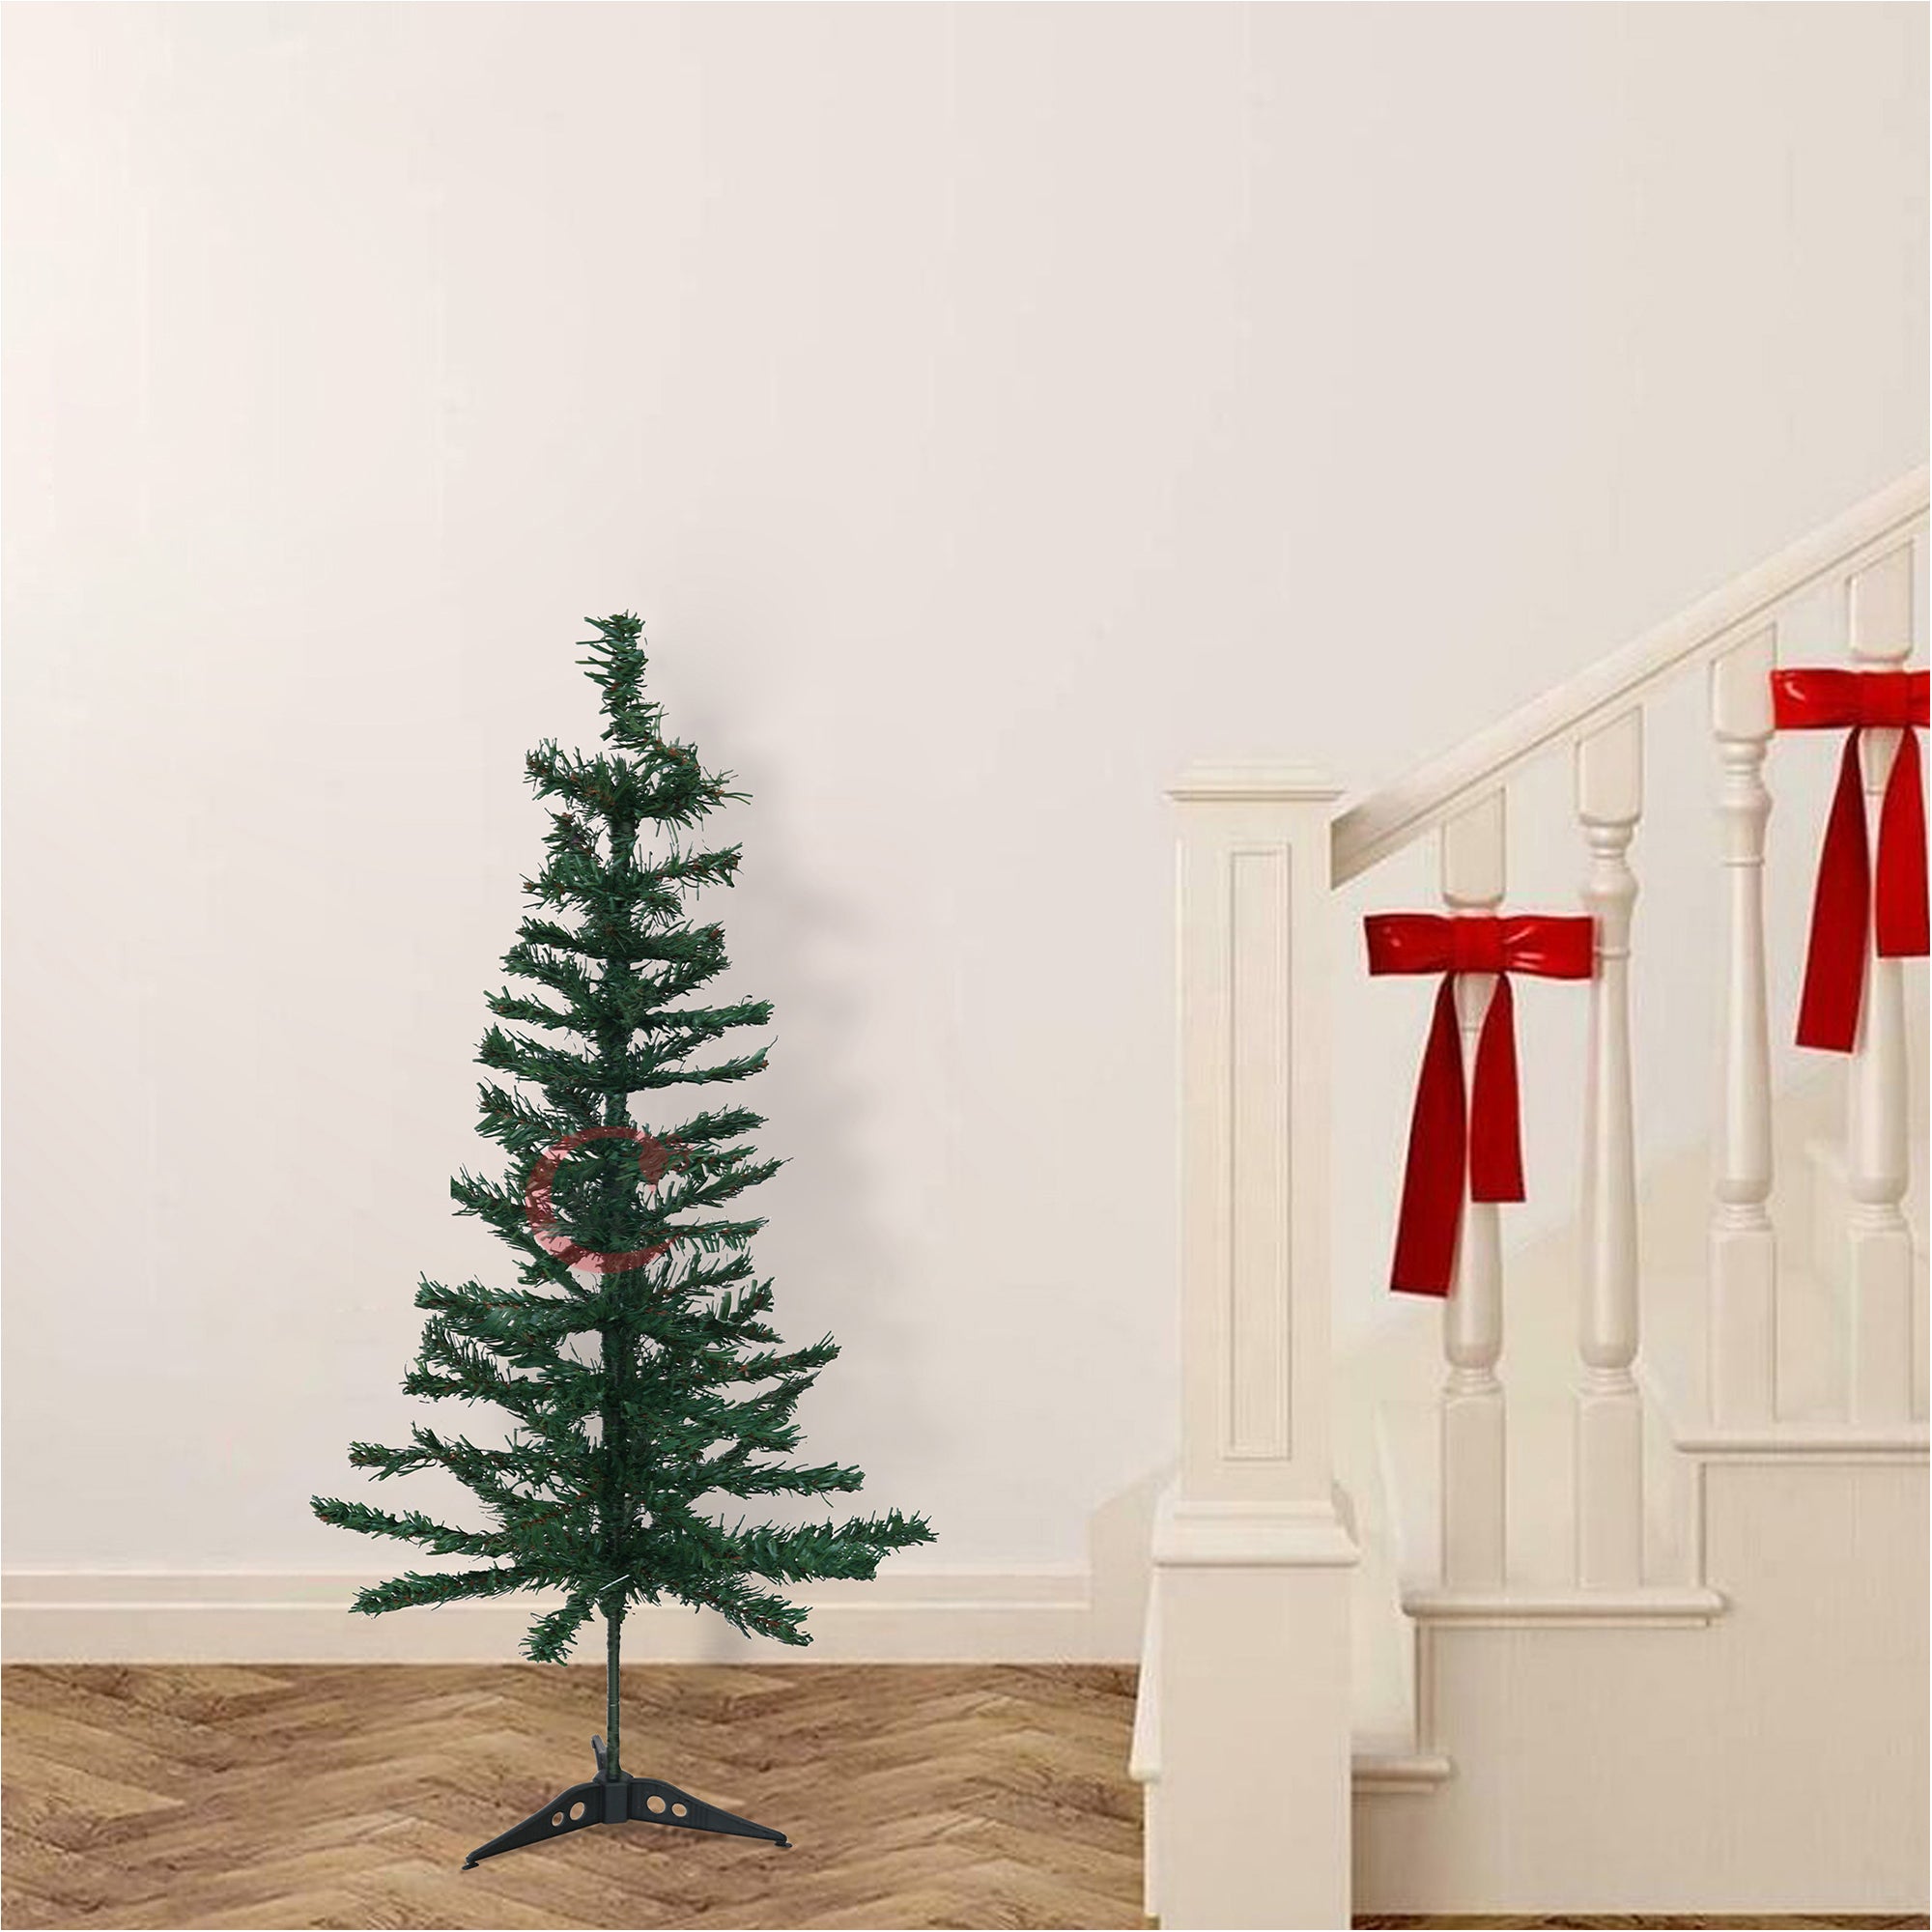 eCraftIndia 3 Feet Green Artificial Christmas Tree Xmas Pine Tree with Metal Stand - Xmas Tree for Indoor, Outdoor, Home, Living Room, Office, Church Decor - Merry Christmas Decoration Item 1